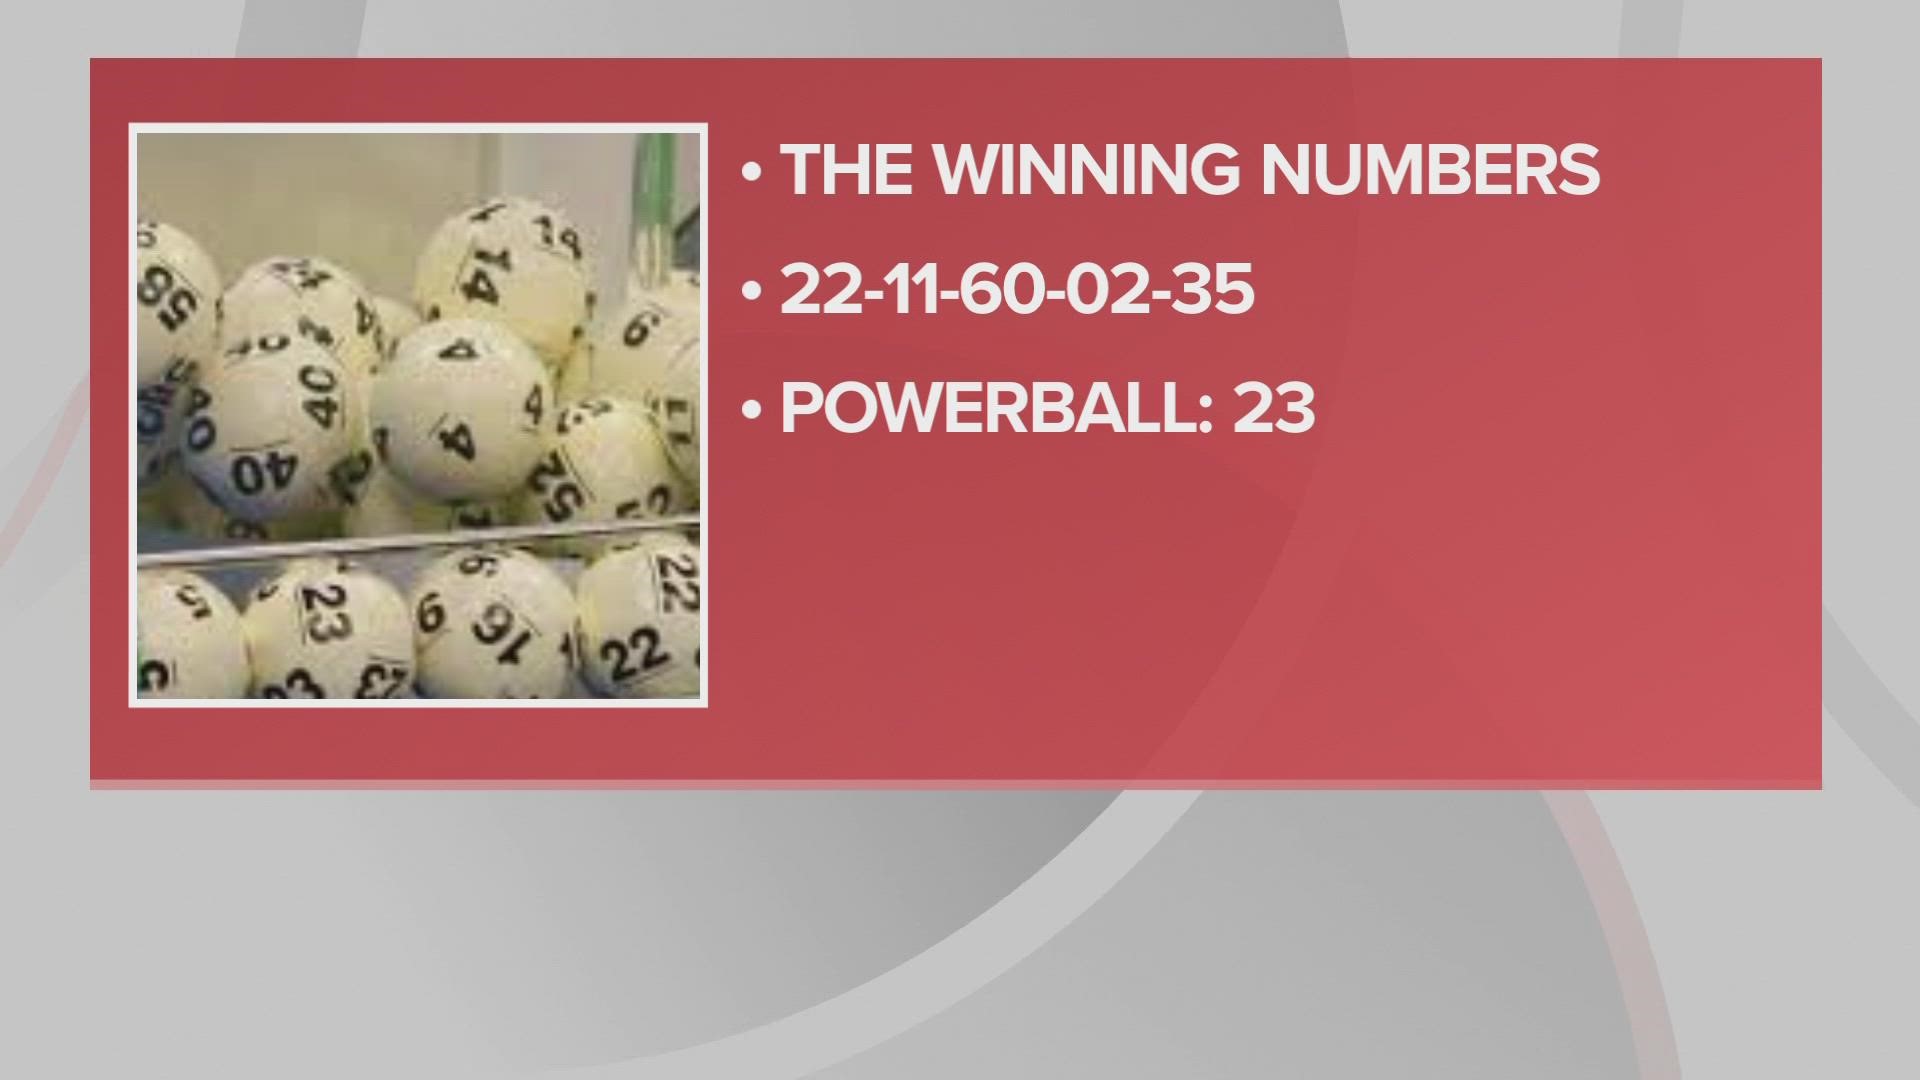 In the 38 Powerball draws since Aug. 3, there hasn't been a jackpot winner.